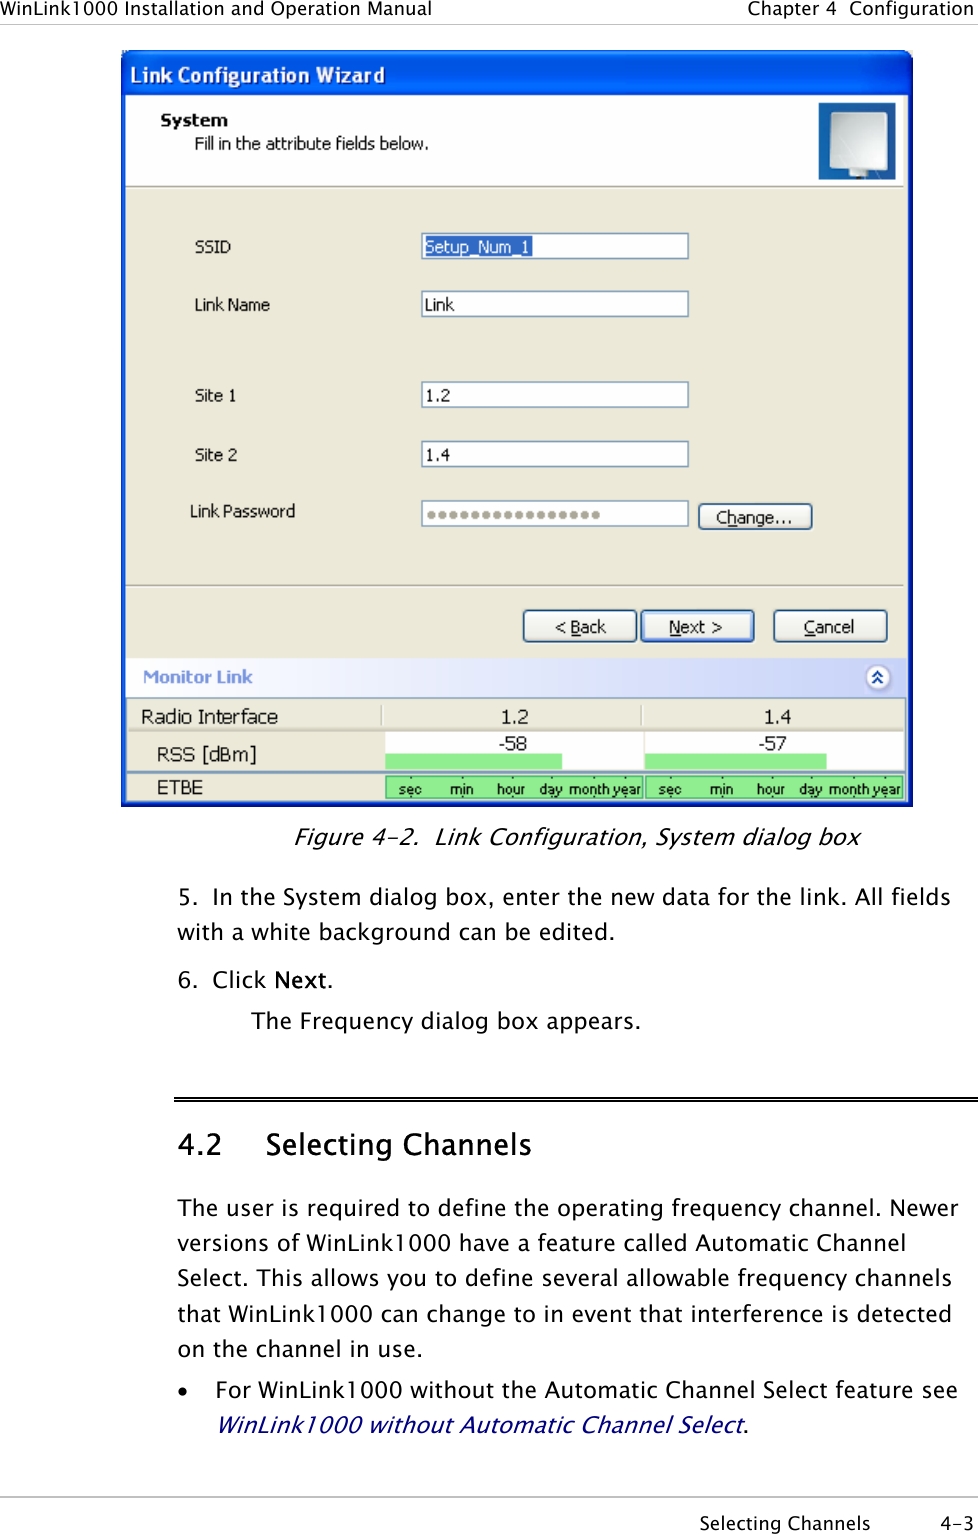 WinLink1000 Installation and Operation Manual  Chapter  4  Configuration  Figure  4-2.  Link Configuration, System dialog box 5.  In the System dialog box, enter the new data for the link. All fields with a white background can be edited. 6. Click Next. The Frequency dialog box appears. 4.2 Selecting Channels The user is required to define the operating frequency channel. Newer versions of WinLink1000 have a feature called Automatic Channel Select. This allows you to define several allowable frequency channels that WinLink1000 can change to in event that interference is detected on the channel in use. • For WinLink1000 without the Automatic Channel Select feature see WinLink1000 without Automatic Channel Select.  Selecting Channels  4-3 